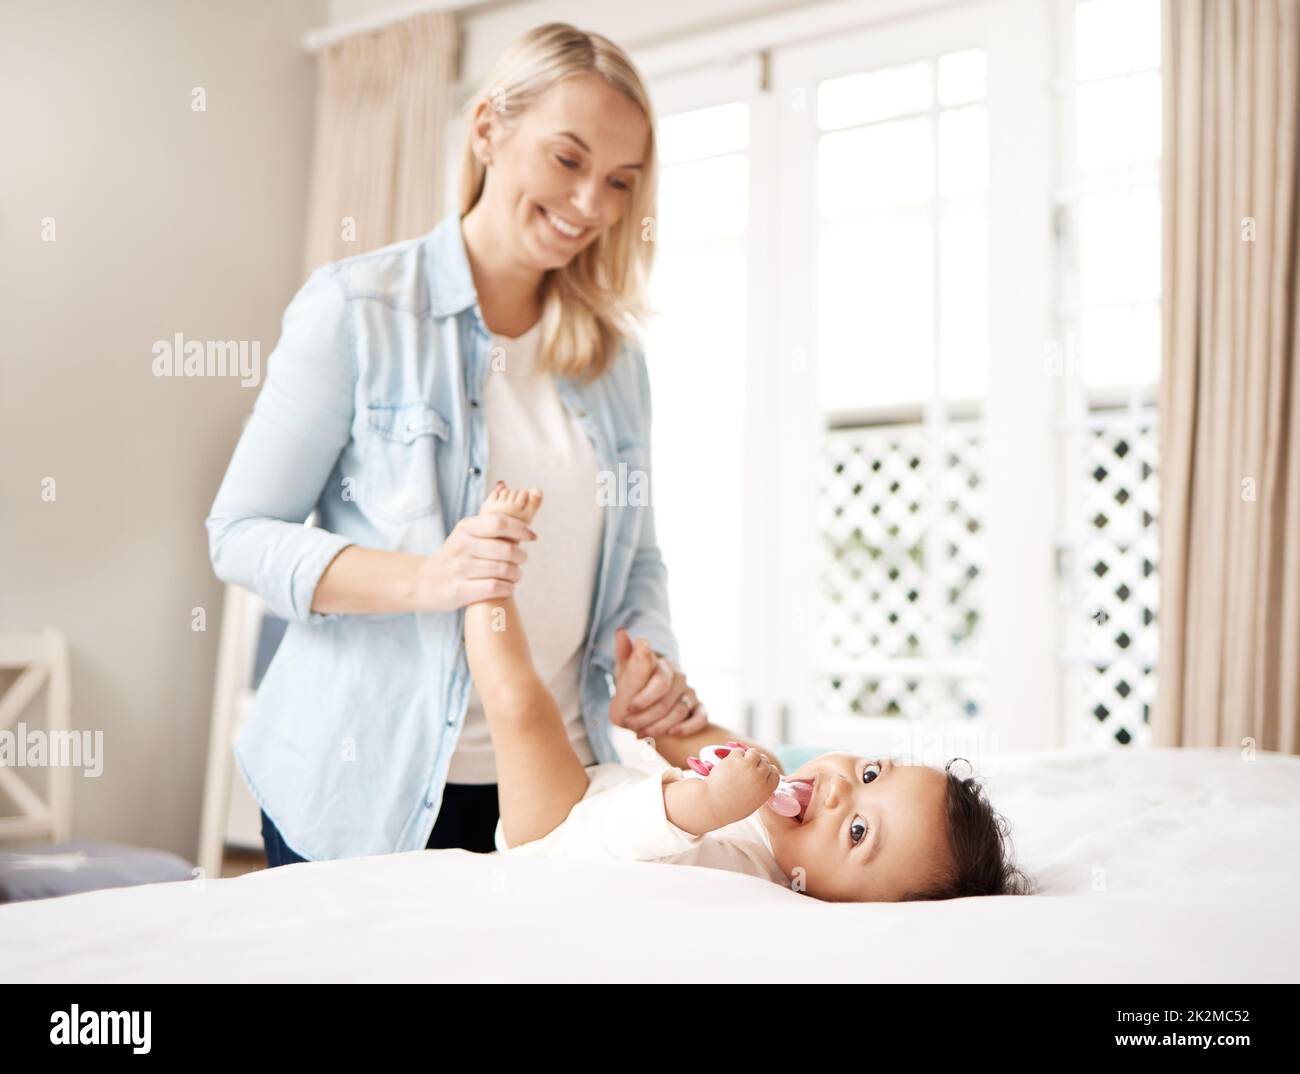 Its a new day, time to make new memories. Shot of a woman bonding with her baby at home. Stock Photo